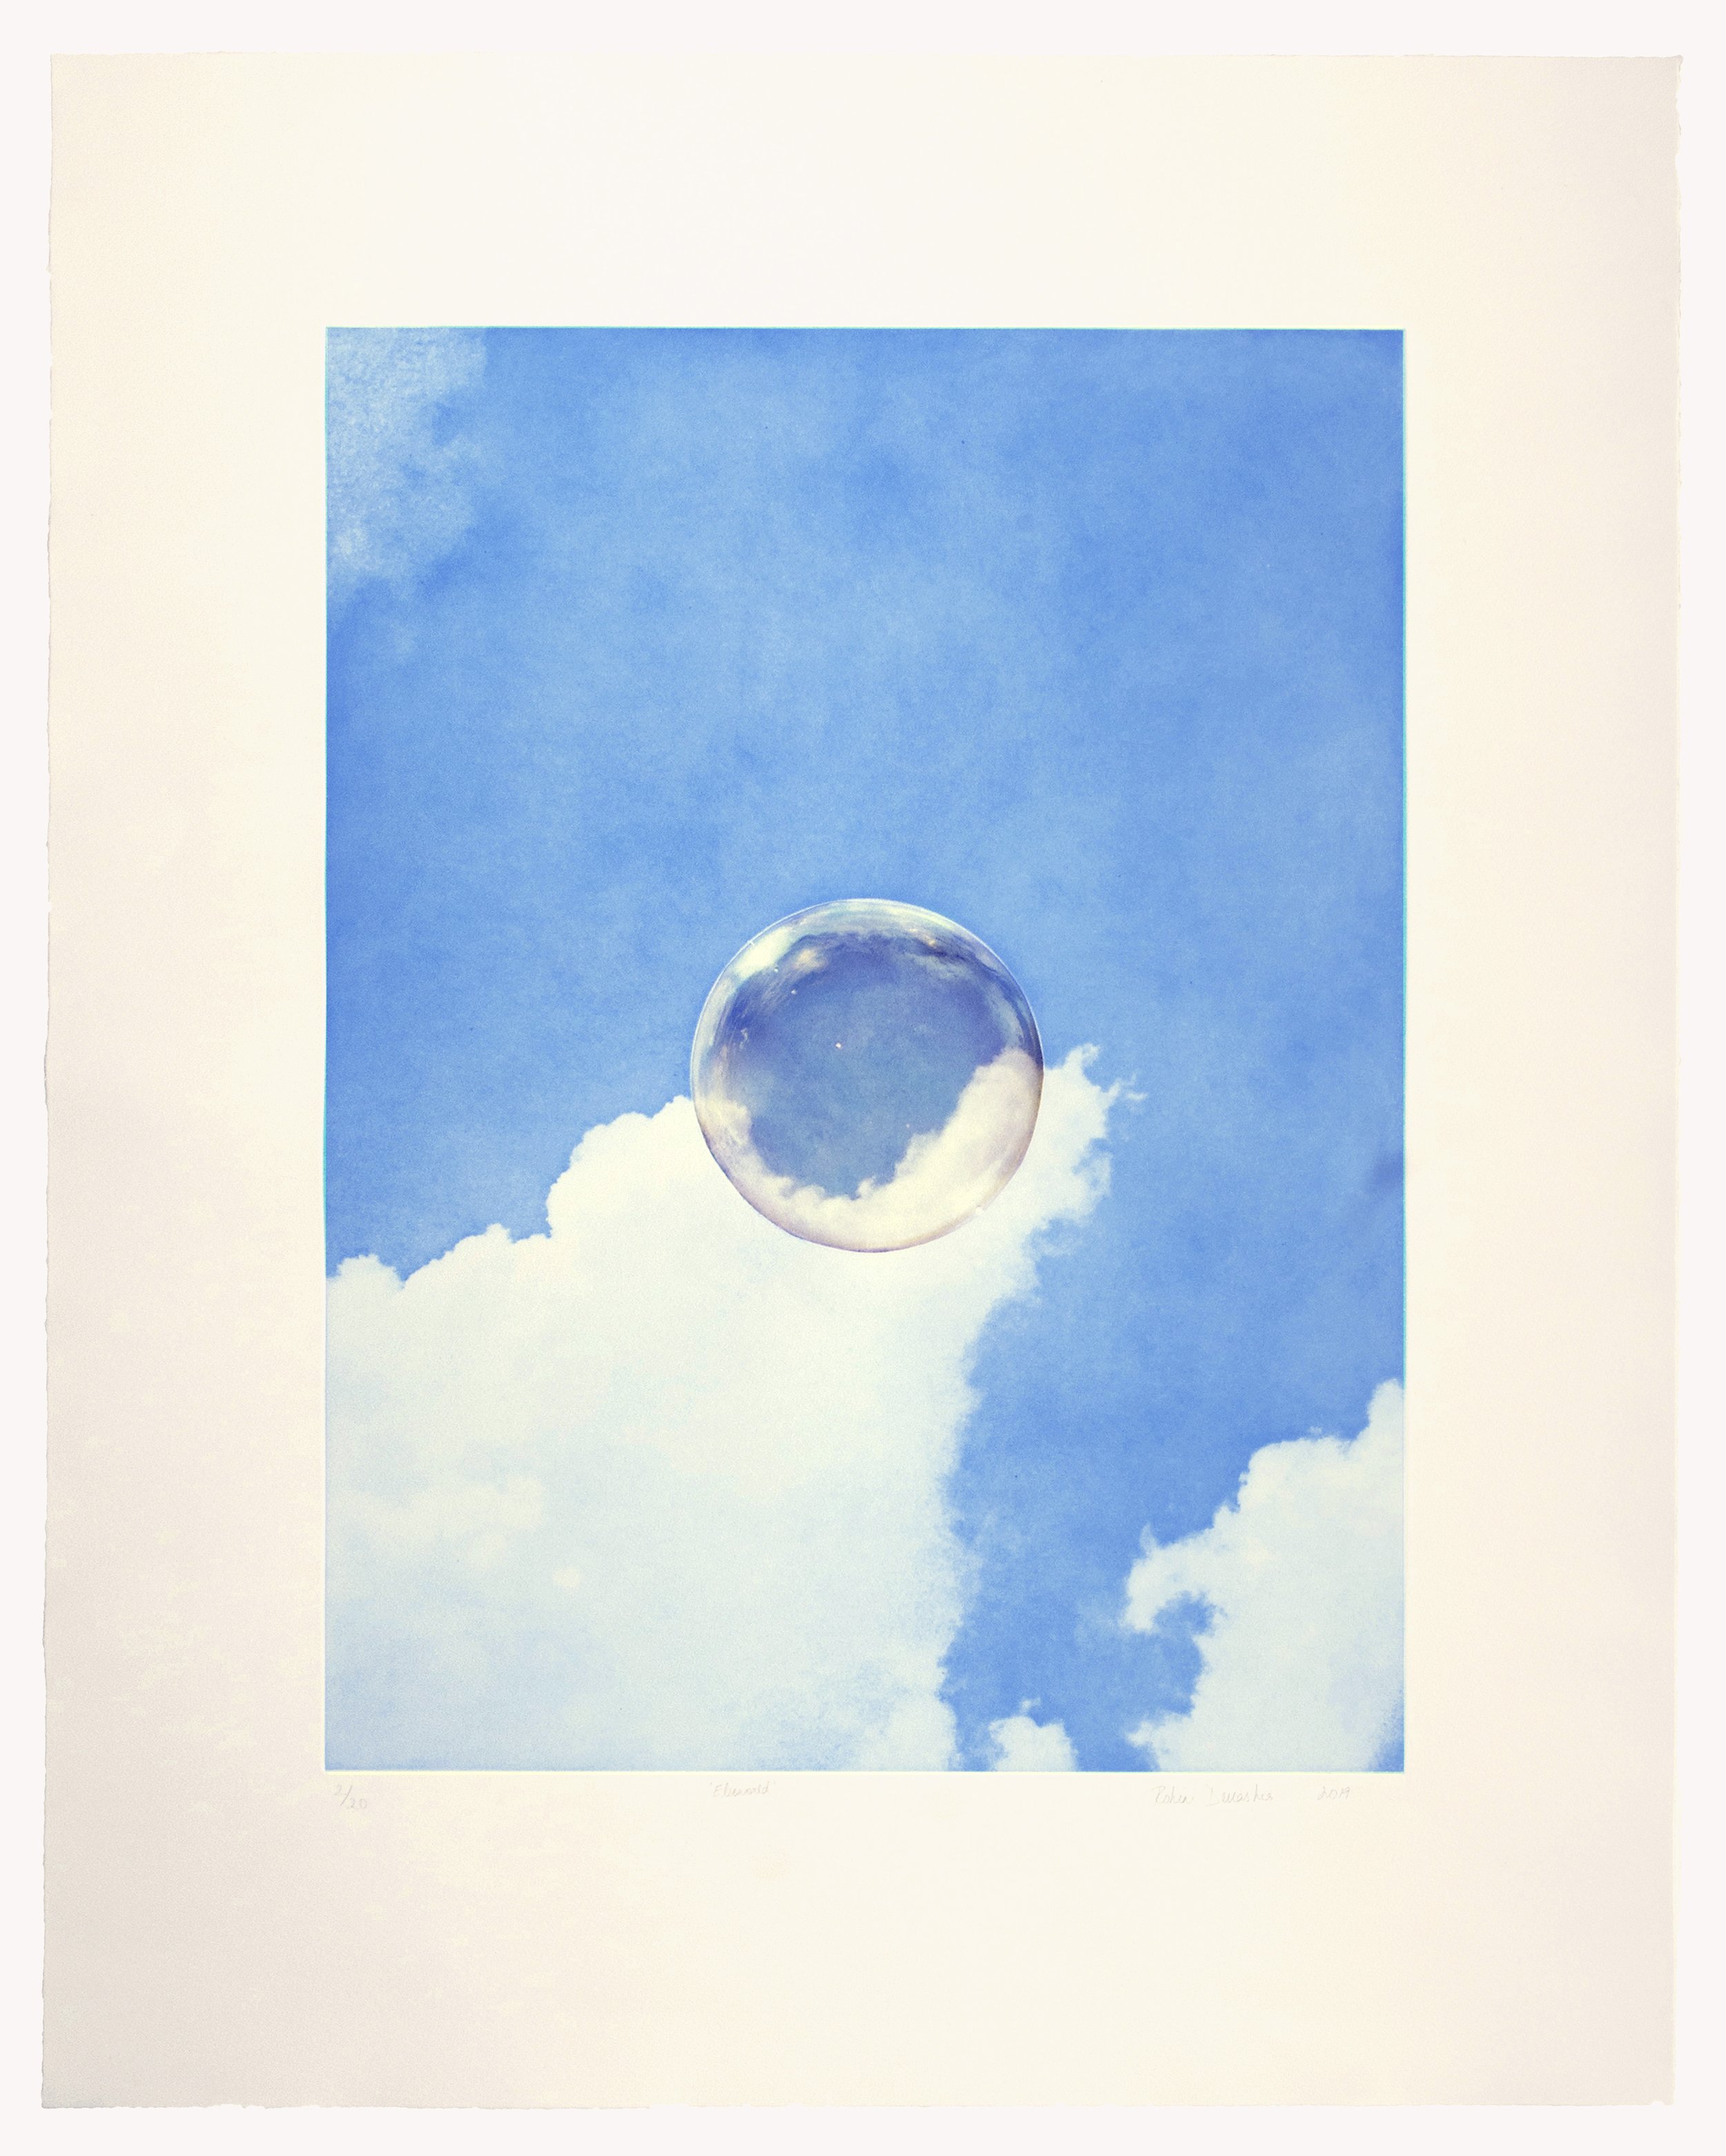  Rohini Devasher,  Elseworld , 2019, photo etching on Velin Arches Blanc paper and bubble digitally printed on Kozo Japanese paper, and applied using chine collé , edition of 20 